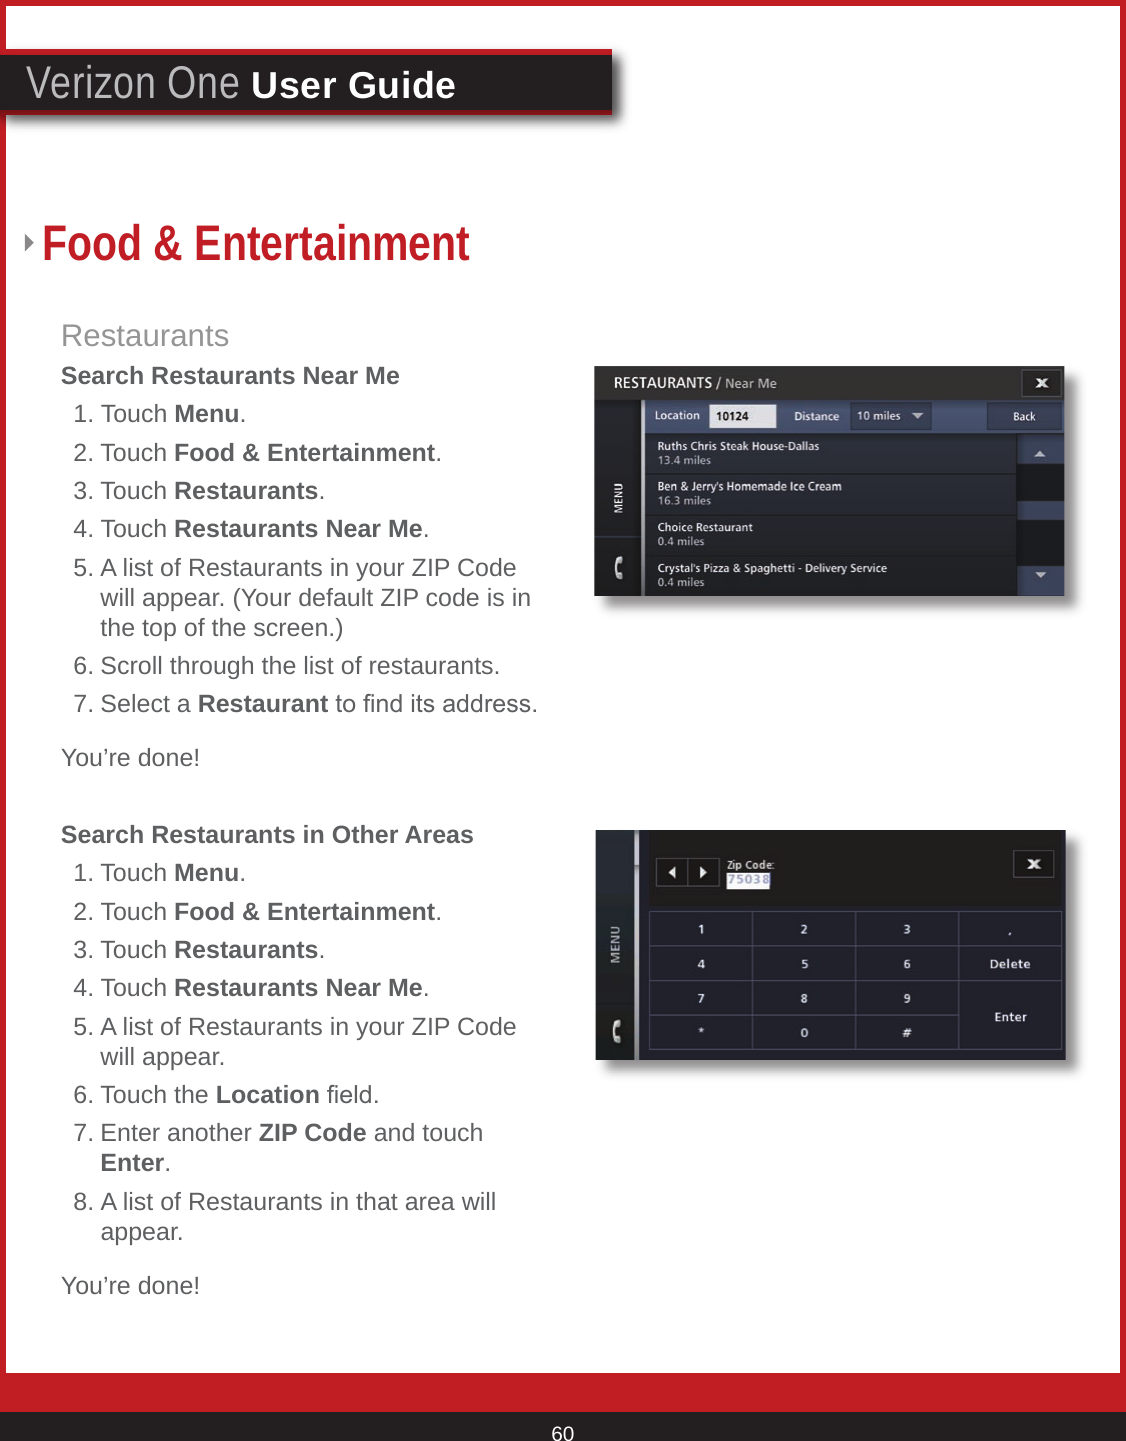 © 2007 Verizon. All Rights Reserved. 60Verizon One User GuideRestaurantsSearch Restaurants Near Me  1. Touch Menu.  2. Touch Food &amp; Entertainment. 3. Touch Restaurants.  4. Touch Restaurants Near Me.  5. A list of Restaurants in your ZIP Code      will appear. (Your default ZIP code is in      the top of the screen.)  6. Scroll through the list of restaurants.  7. Select a Restaurant to nd its address. You’re done!Search Restaurants in Other Areas  1. Touch Menu.  2. Touch Food &amp; Entertainment. 3. Touch Restaurants.  4. Touch Restaurants Near Me.  5. A list of Restaurants in your ZIP Code      will appear.  6. Touch the Location eld.  7. Enter another ZIP Code and touch       Enter.  8. A list of Restaurants in that area will      appear.You’re done!Food &amp; Entertainment